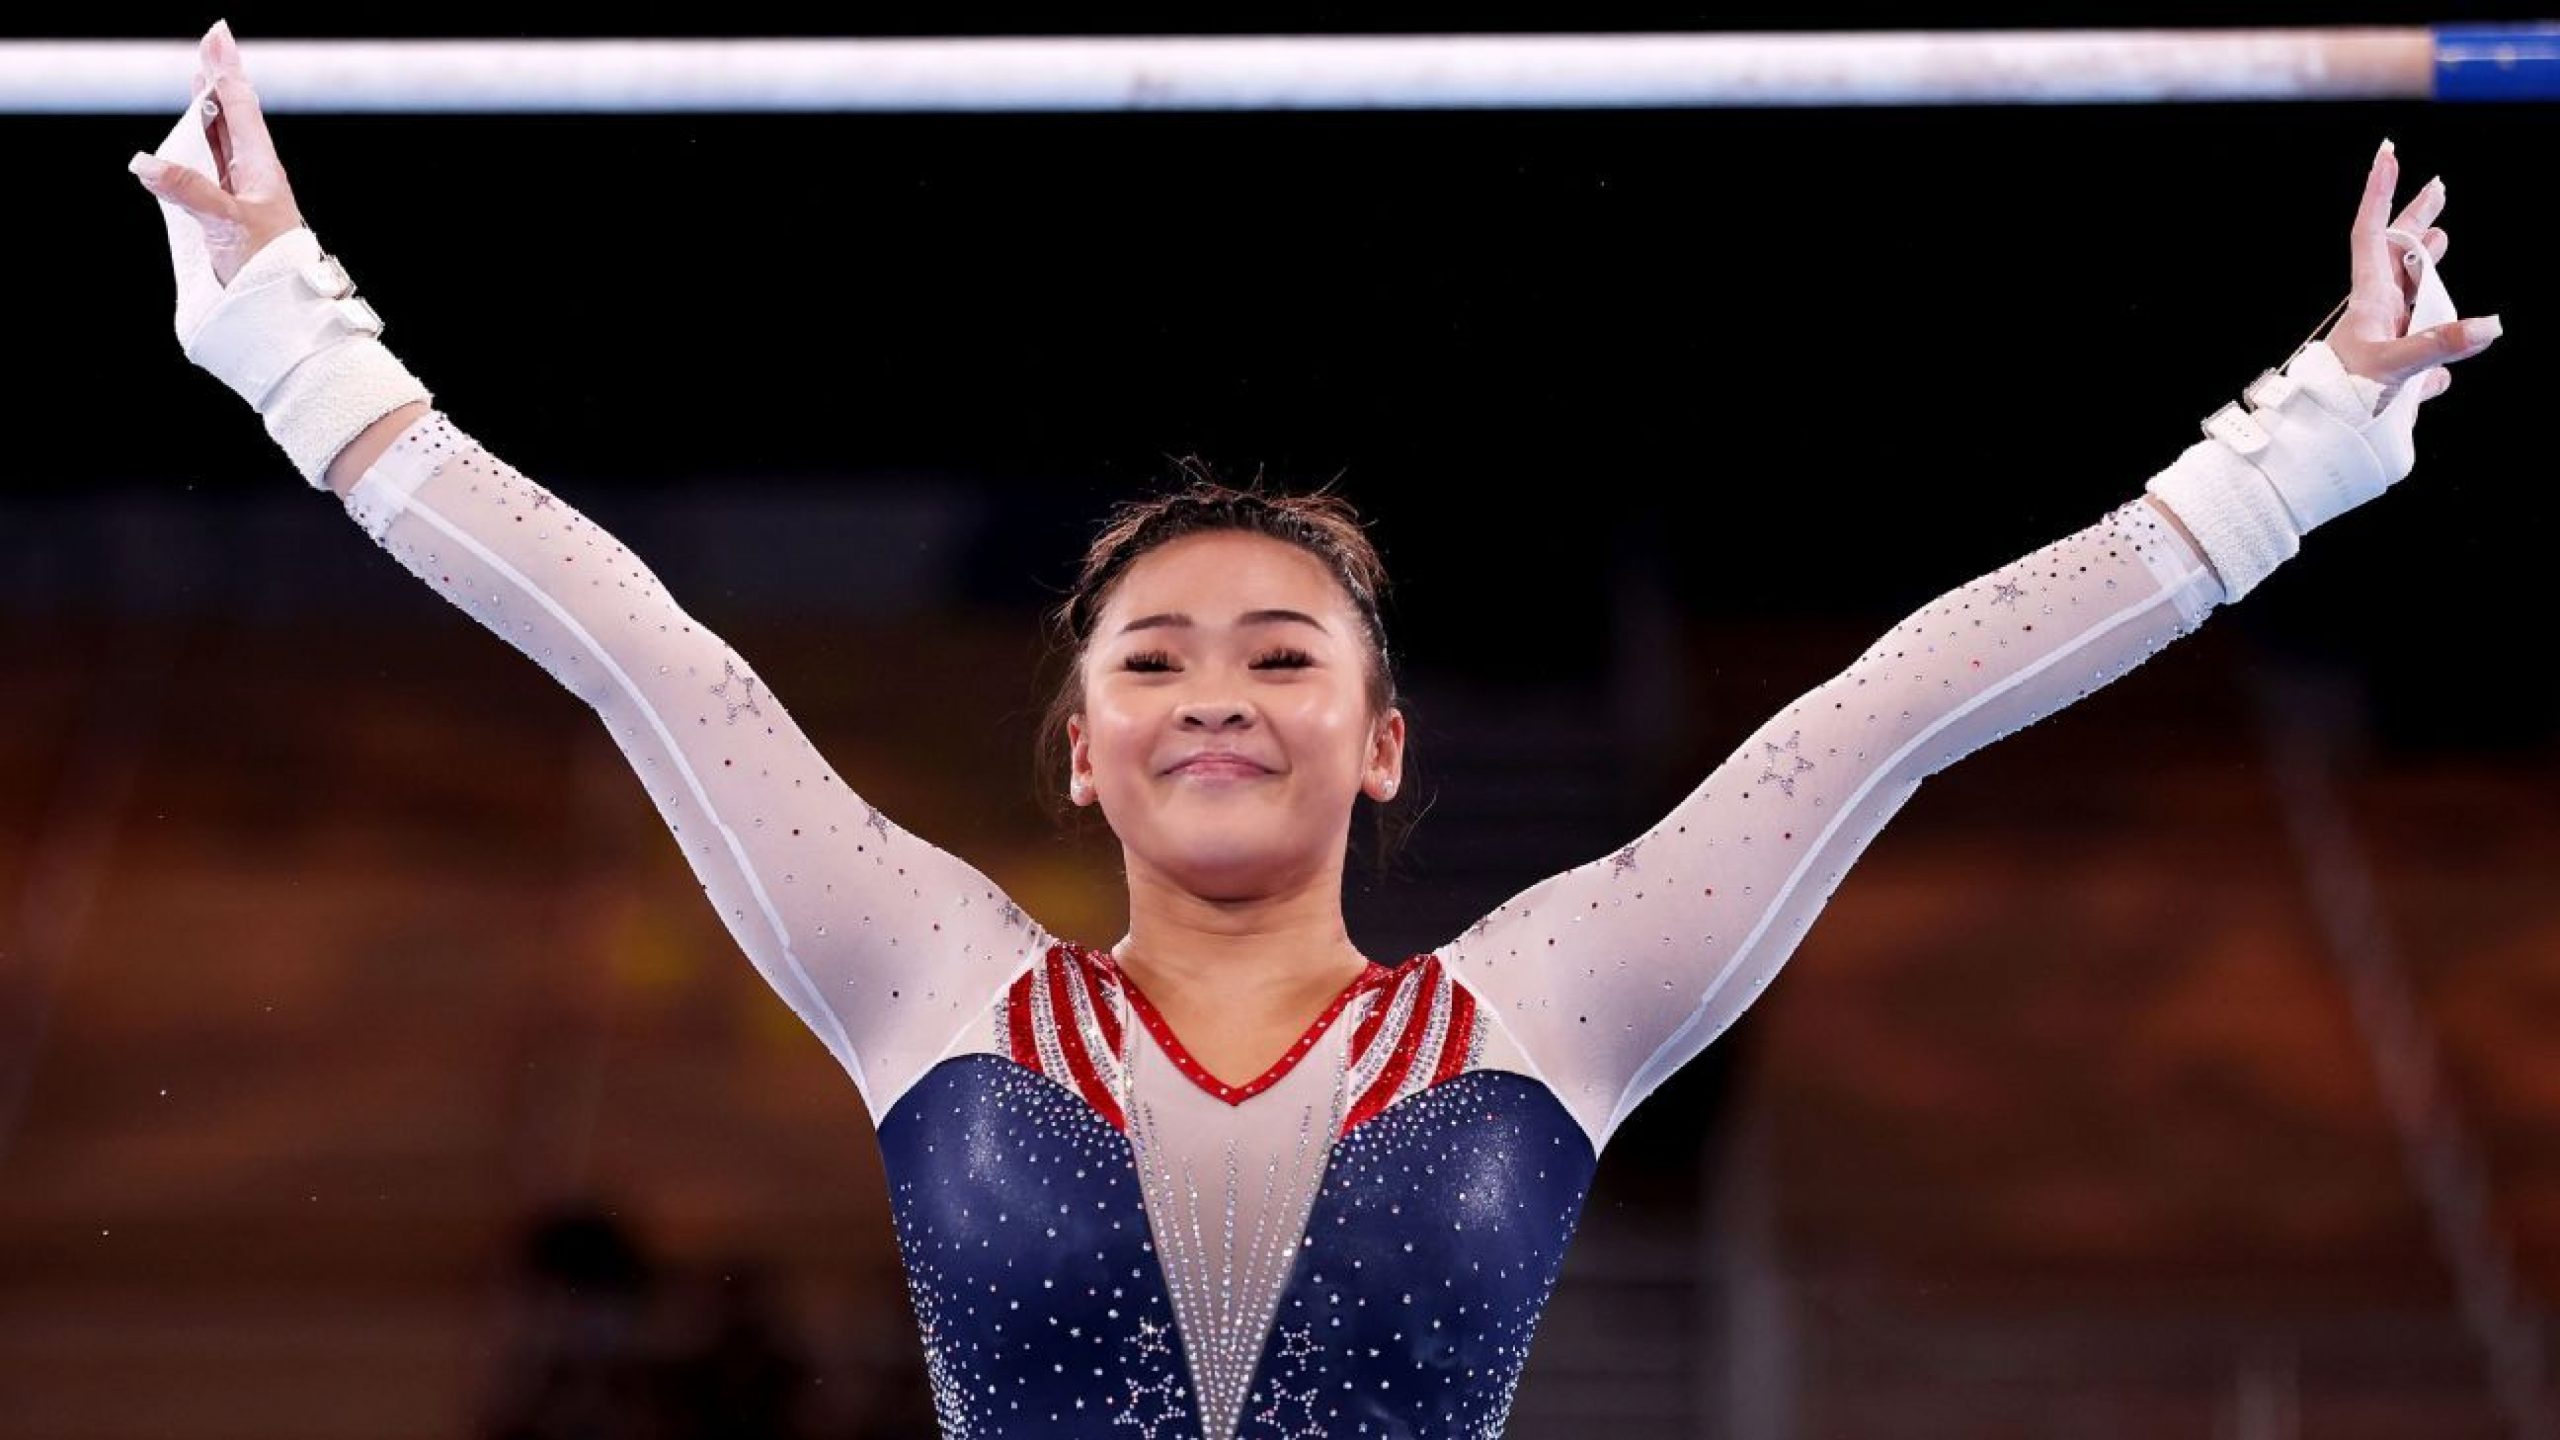 Olympic gymnastics live updates: Suni Lee, MyKayla Skinner and Jade Carey compete in event finals